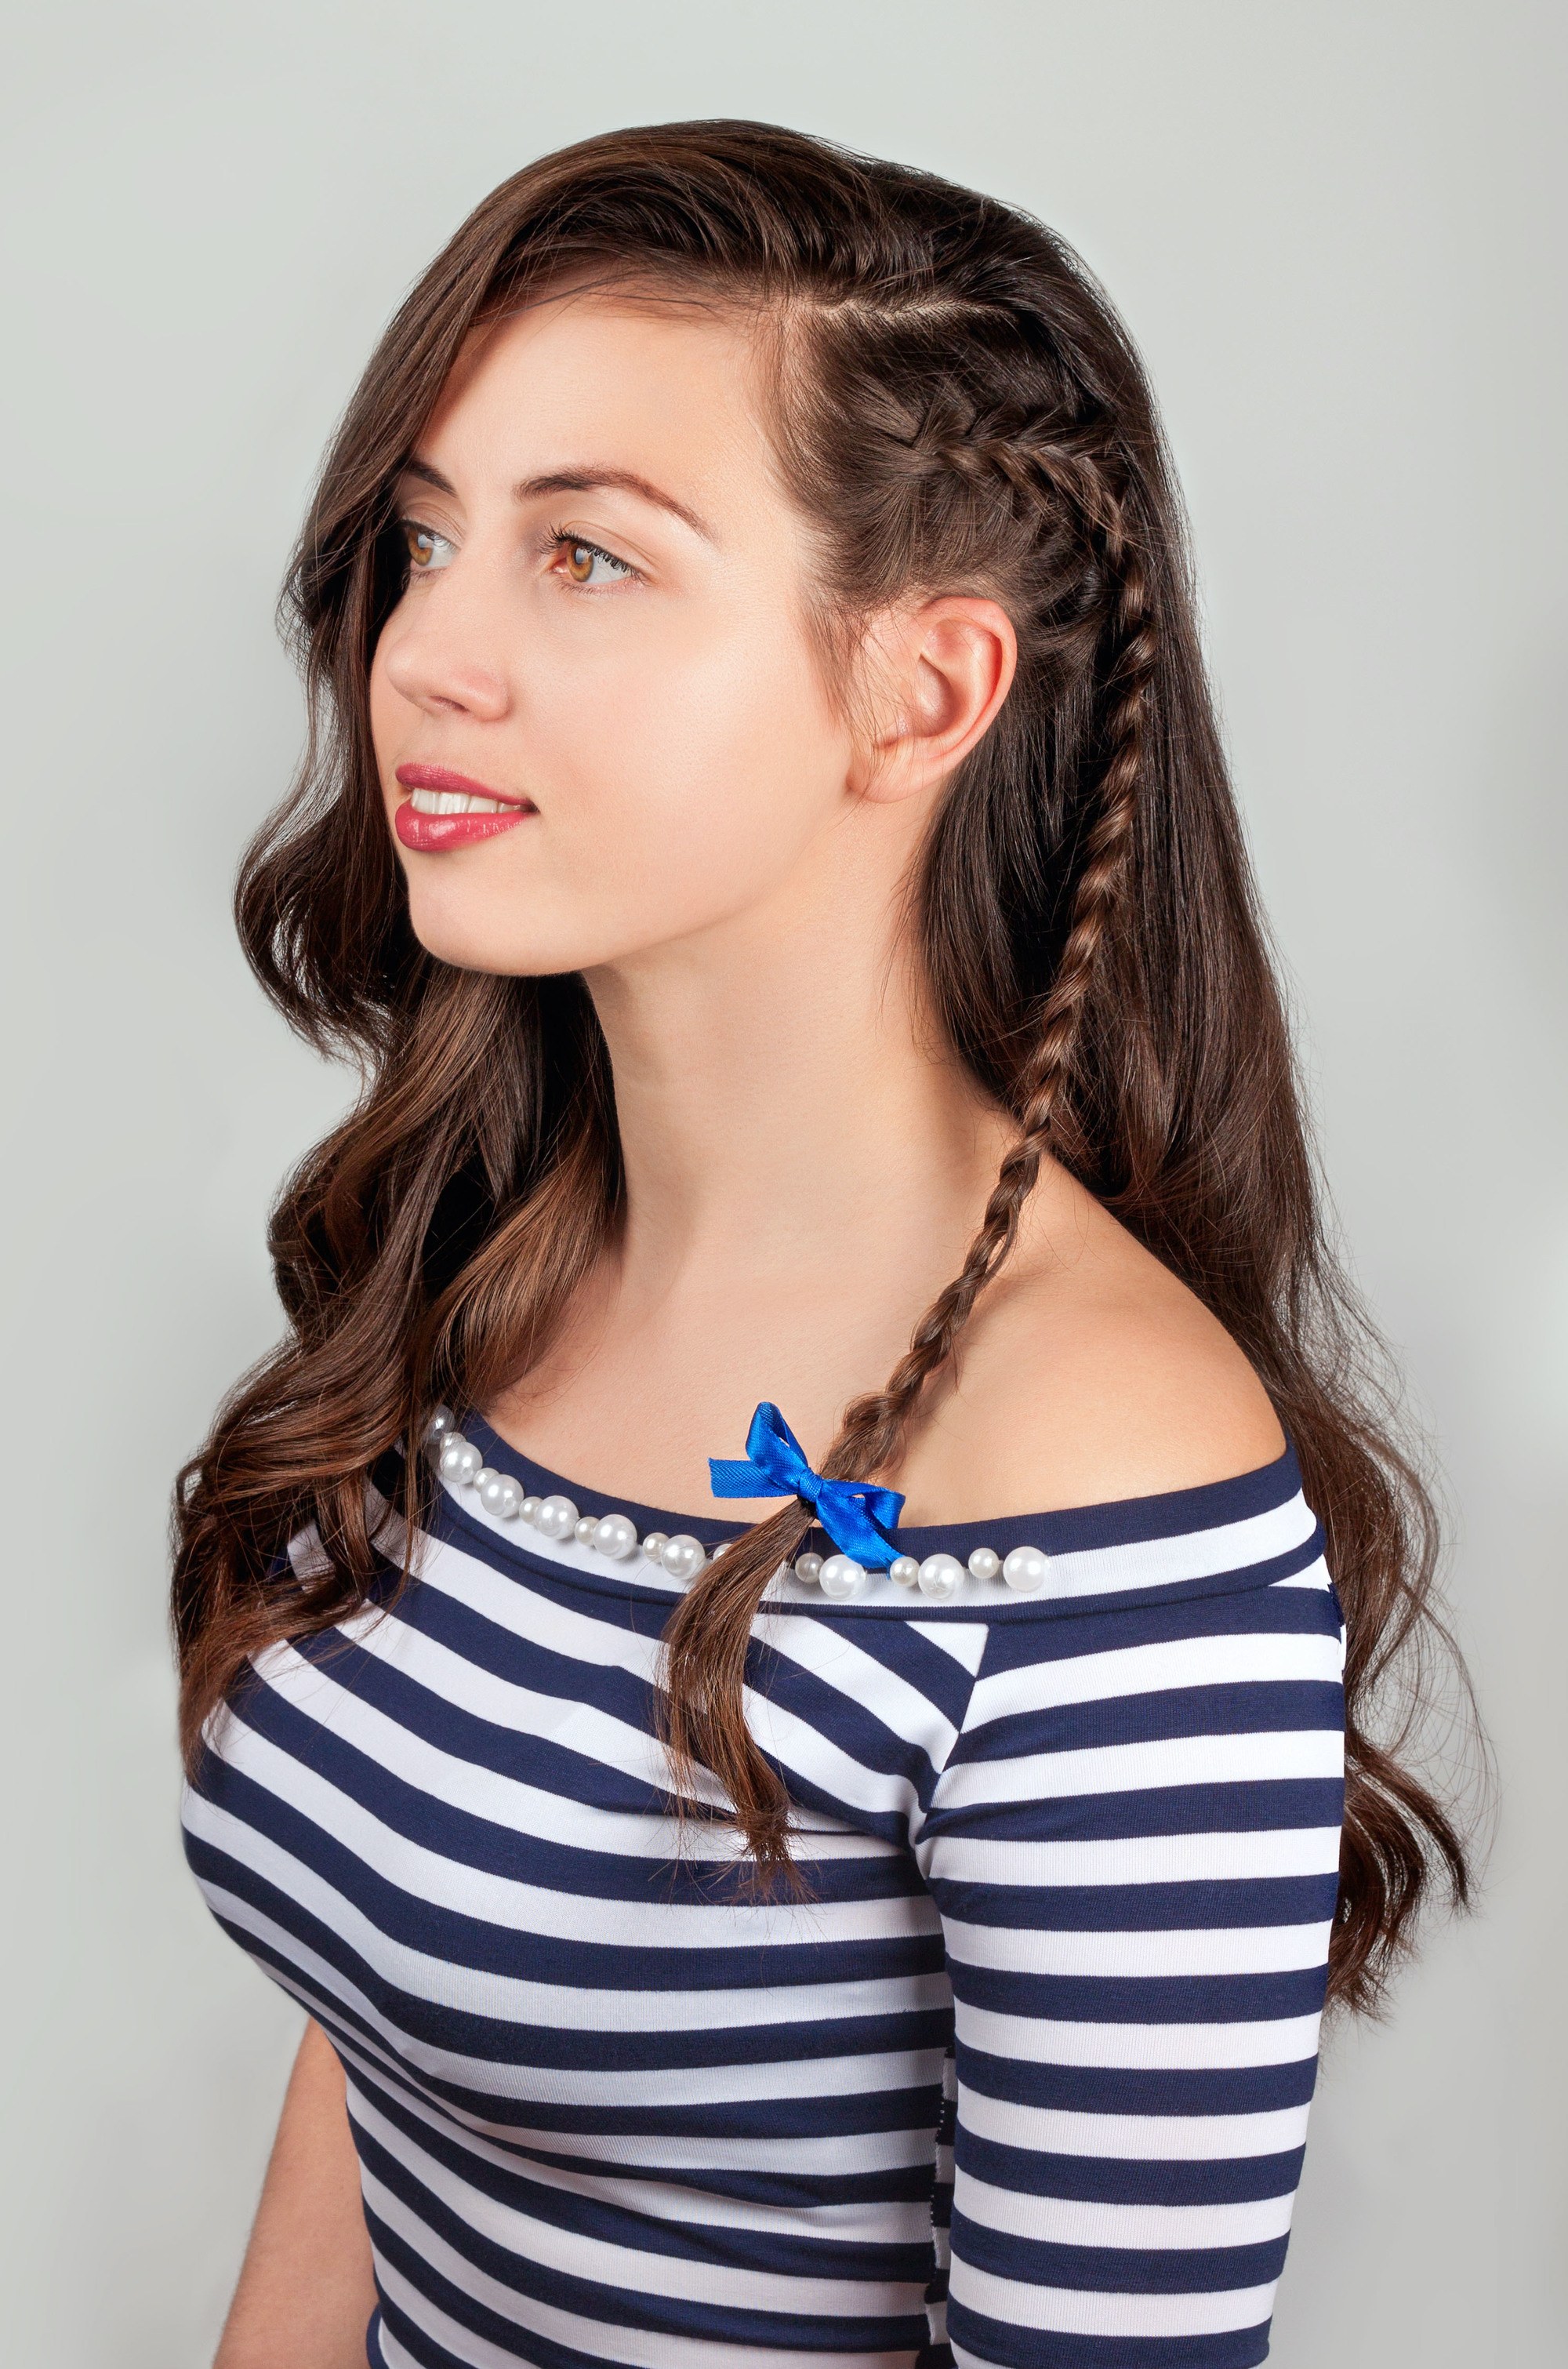 Half Braided Hairstyles You Can Style in Minutes